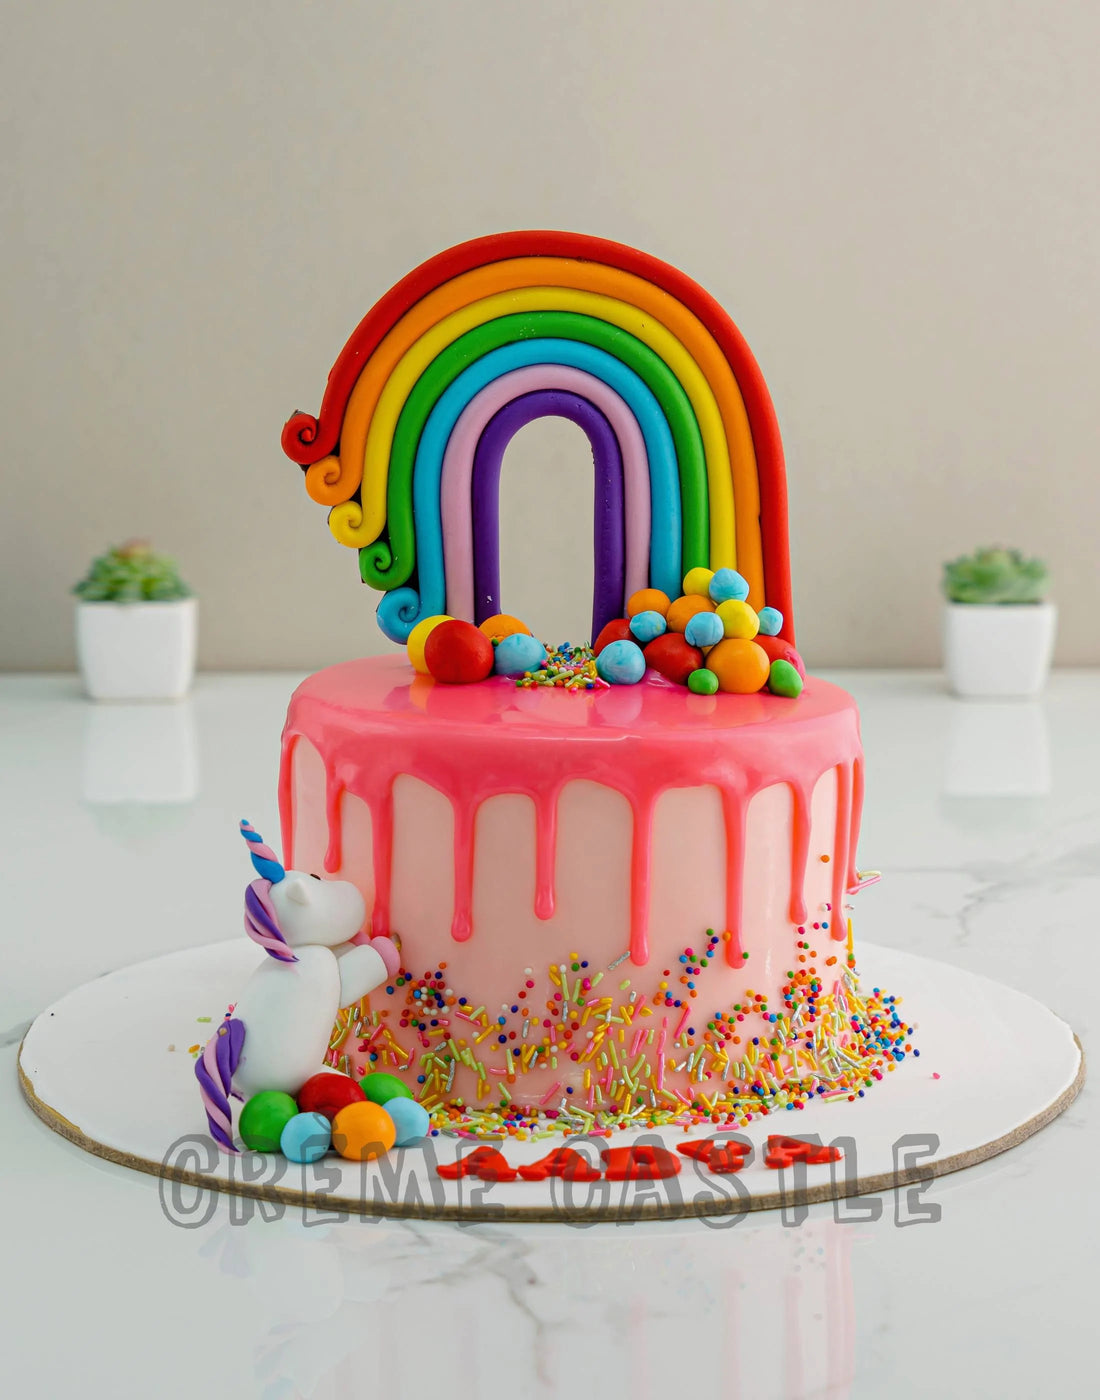 Unicorn Theme Cake in Pink by Creme Castle